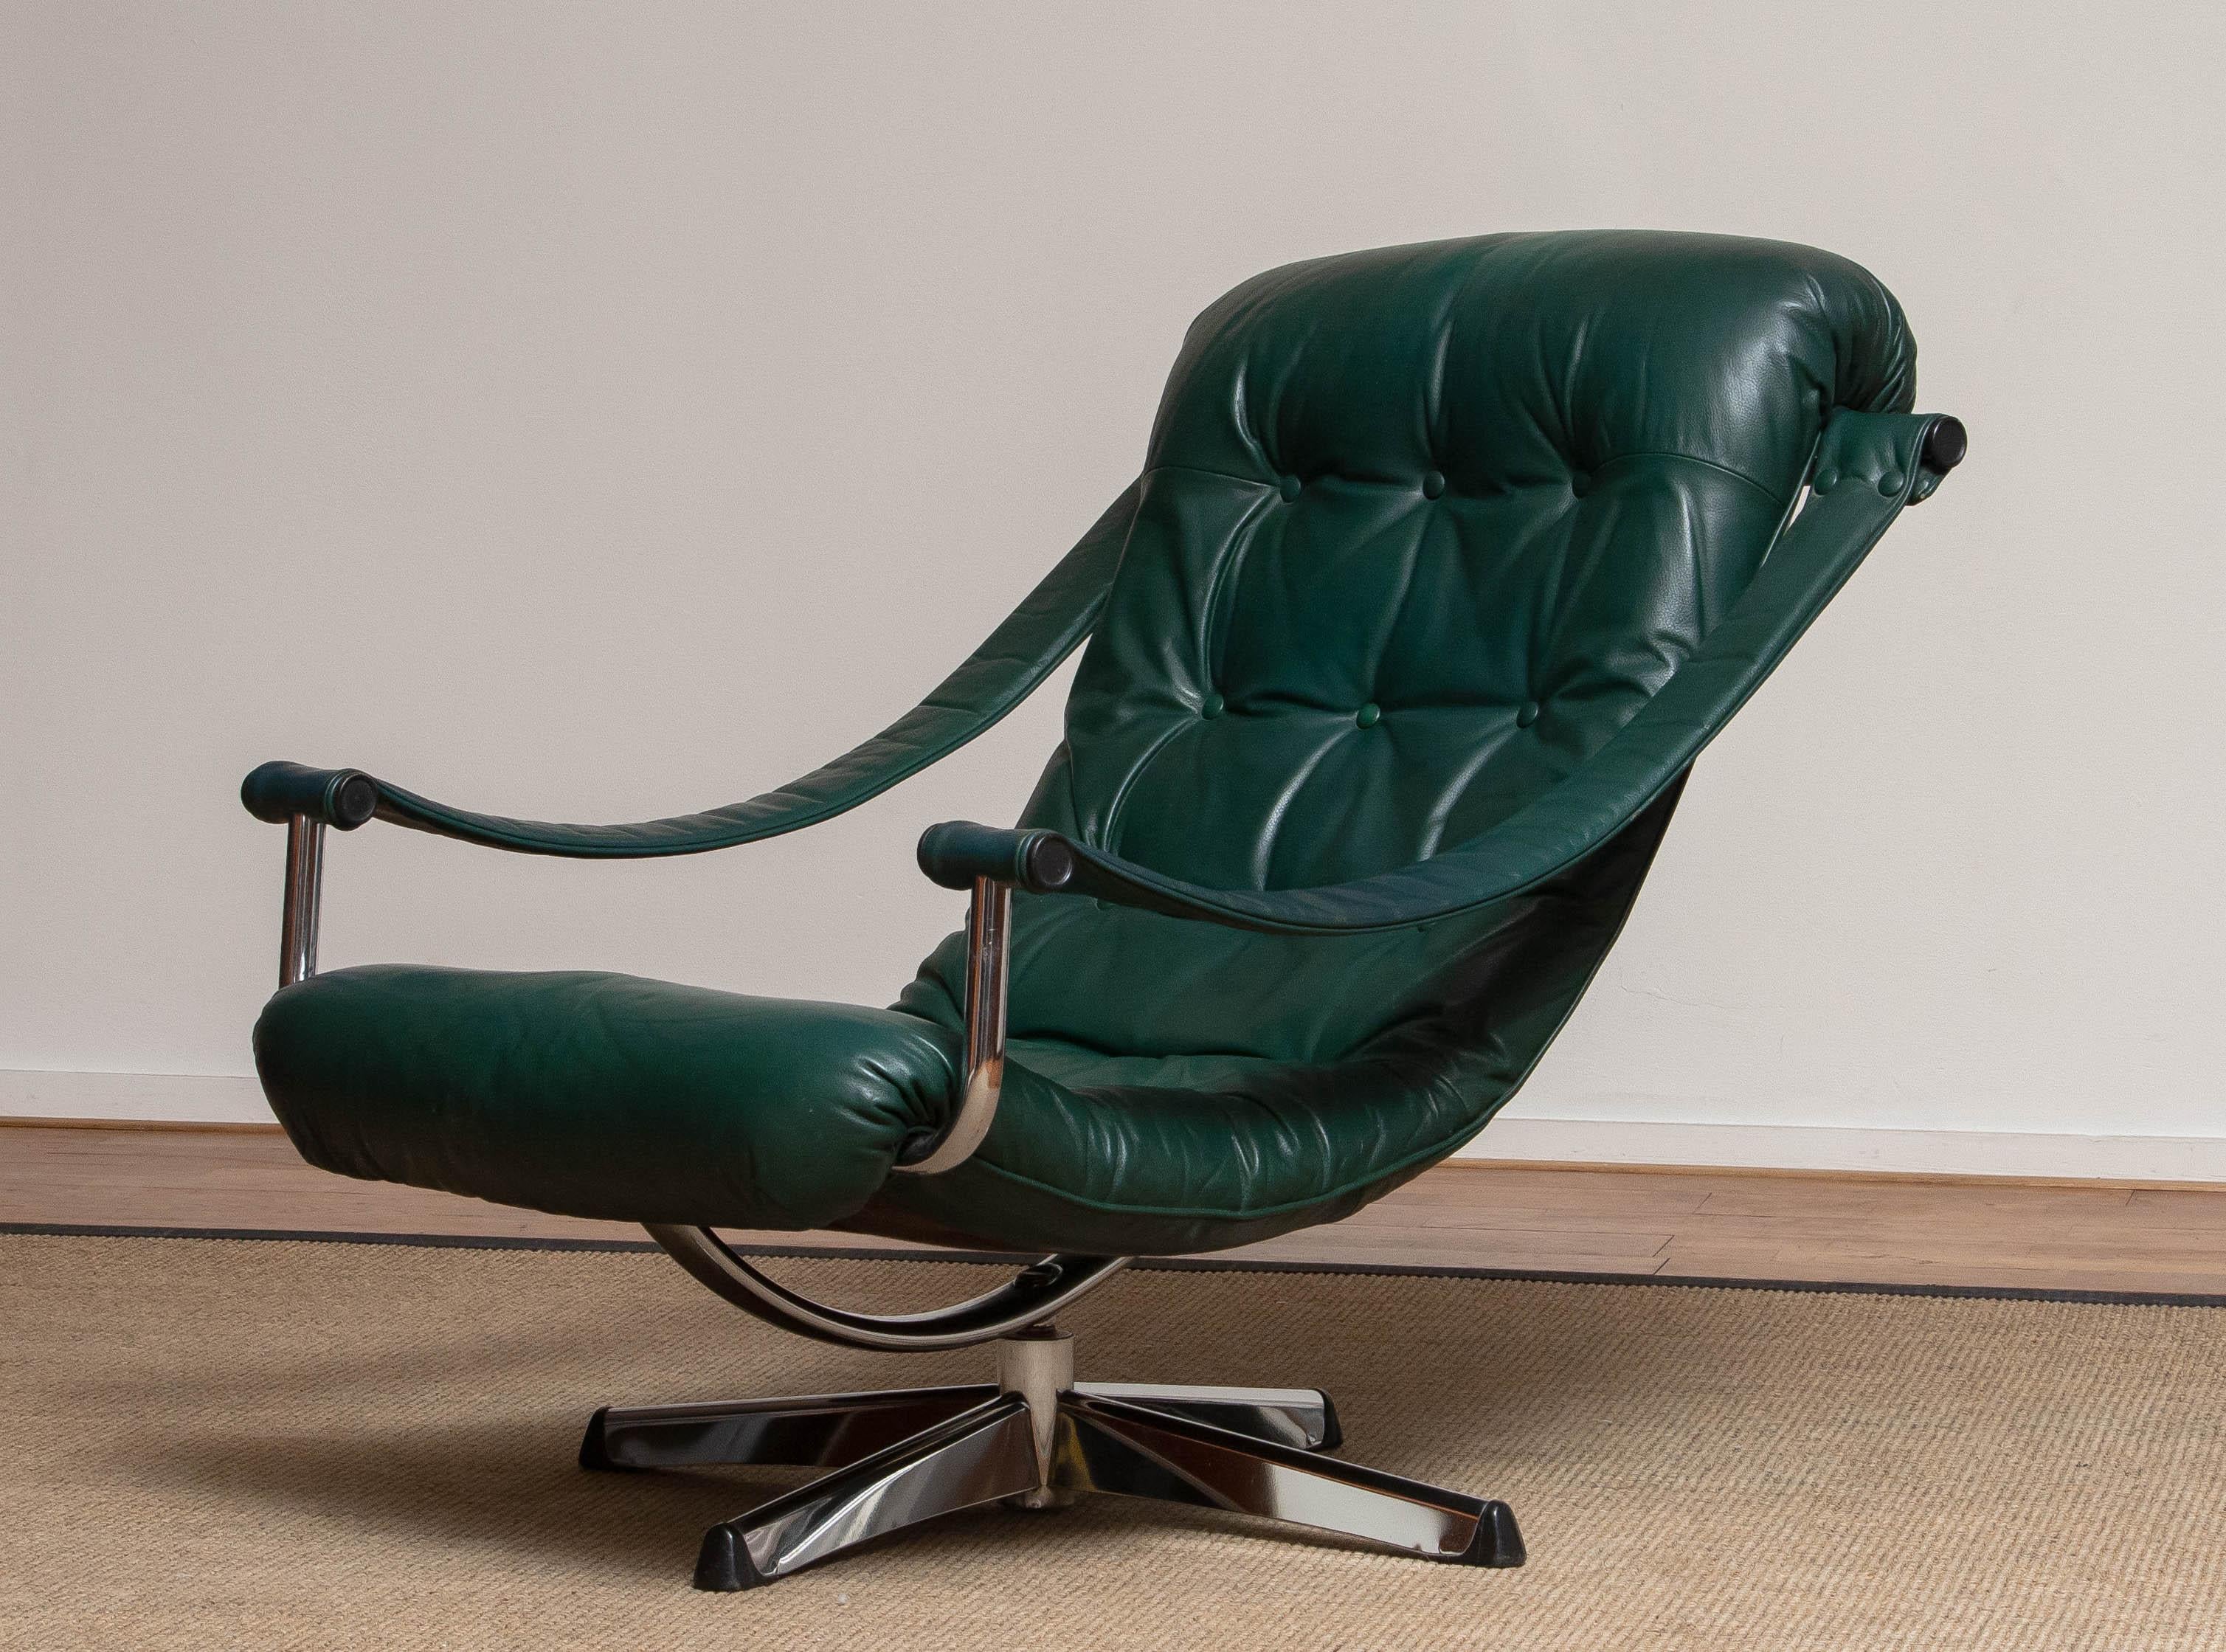 Beautiful moderen designed 'Oxford Green' leather swivel chair by Göte Mobler Nassjö in Sweden.
Tufted seat and backrest in allover good condition. 
Beside the comfort this swivel chair is an absolute eye catcher in your interior.
Please note